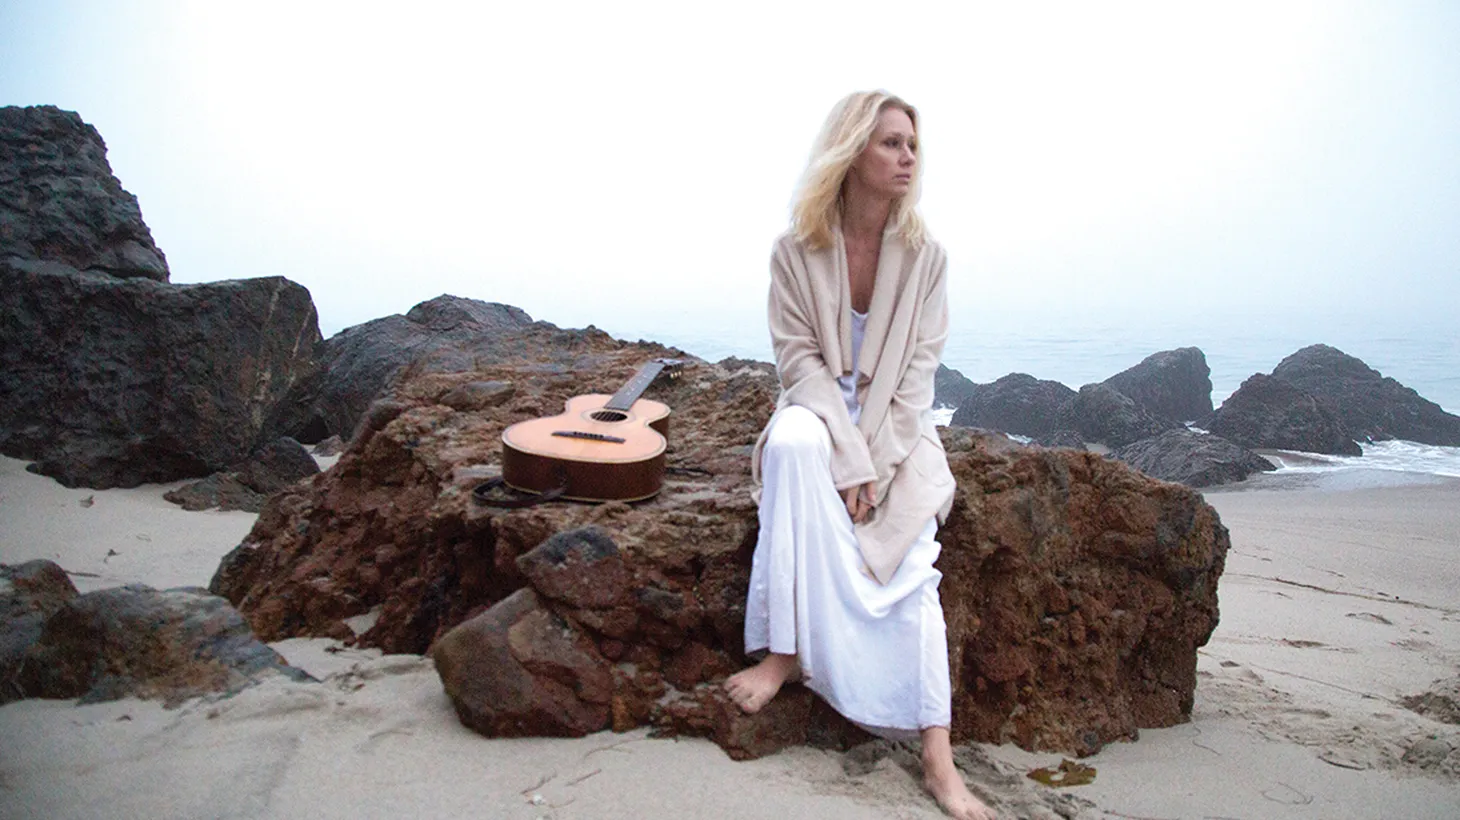 Grammy-Award winning singer/songwriter Shelby Lynne takes a break from recording her new album to visit us on Morning Becomes Eclectic at 11:15am.